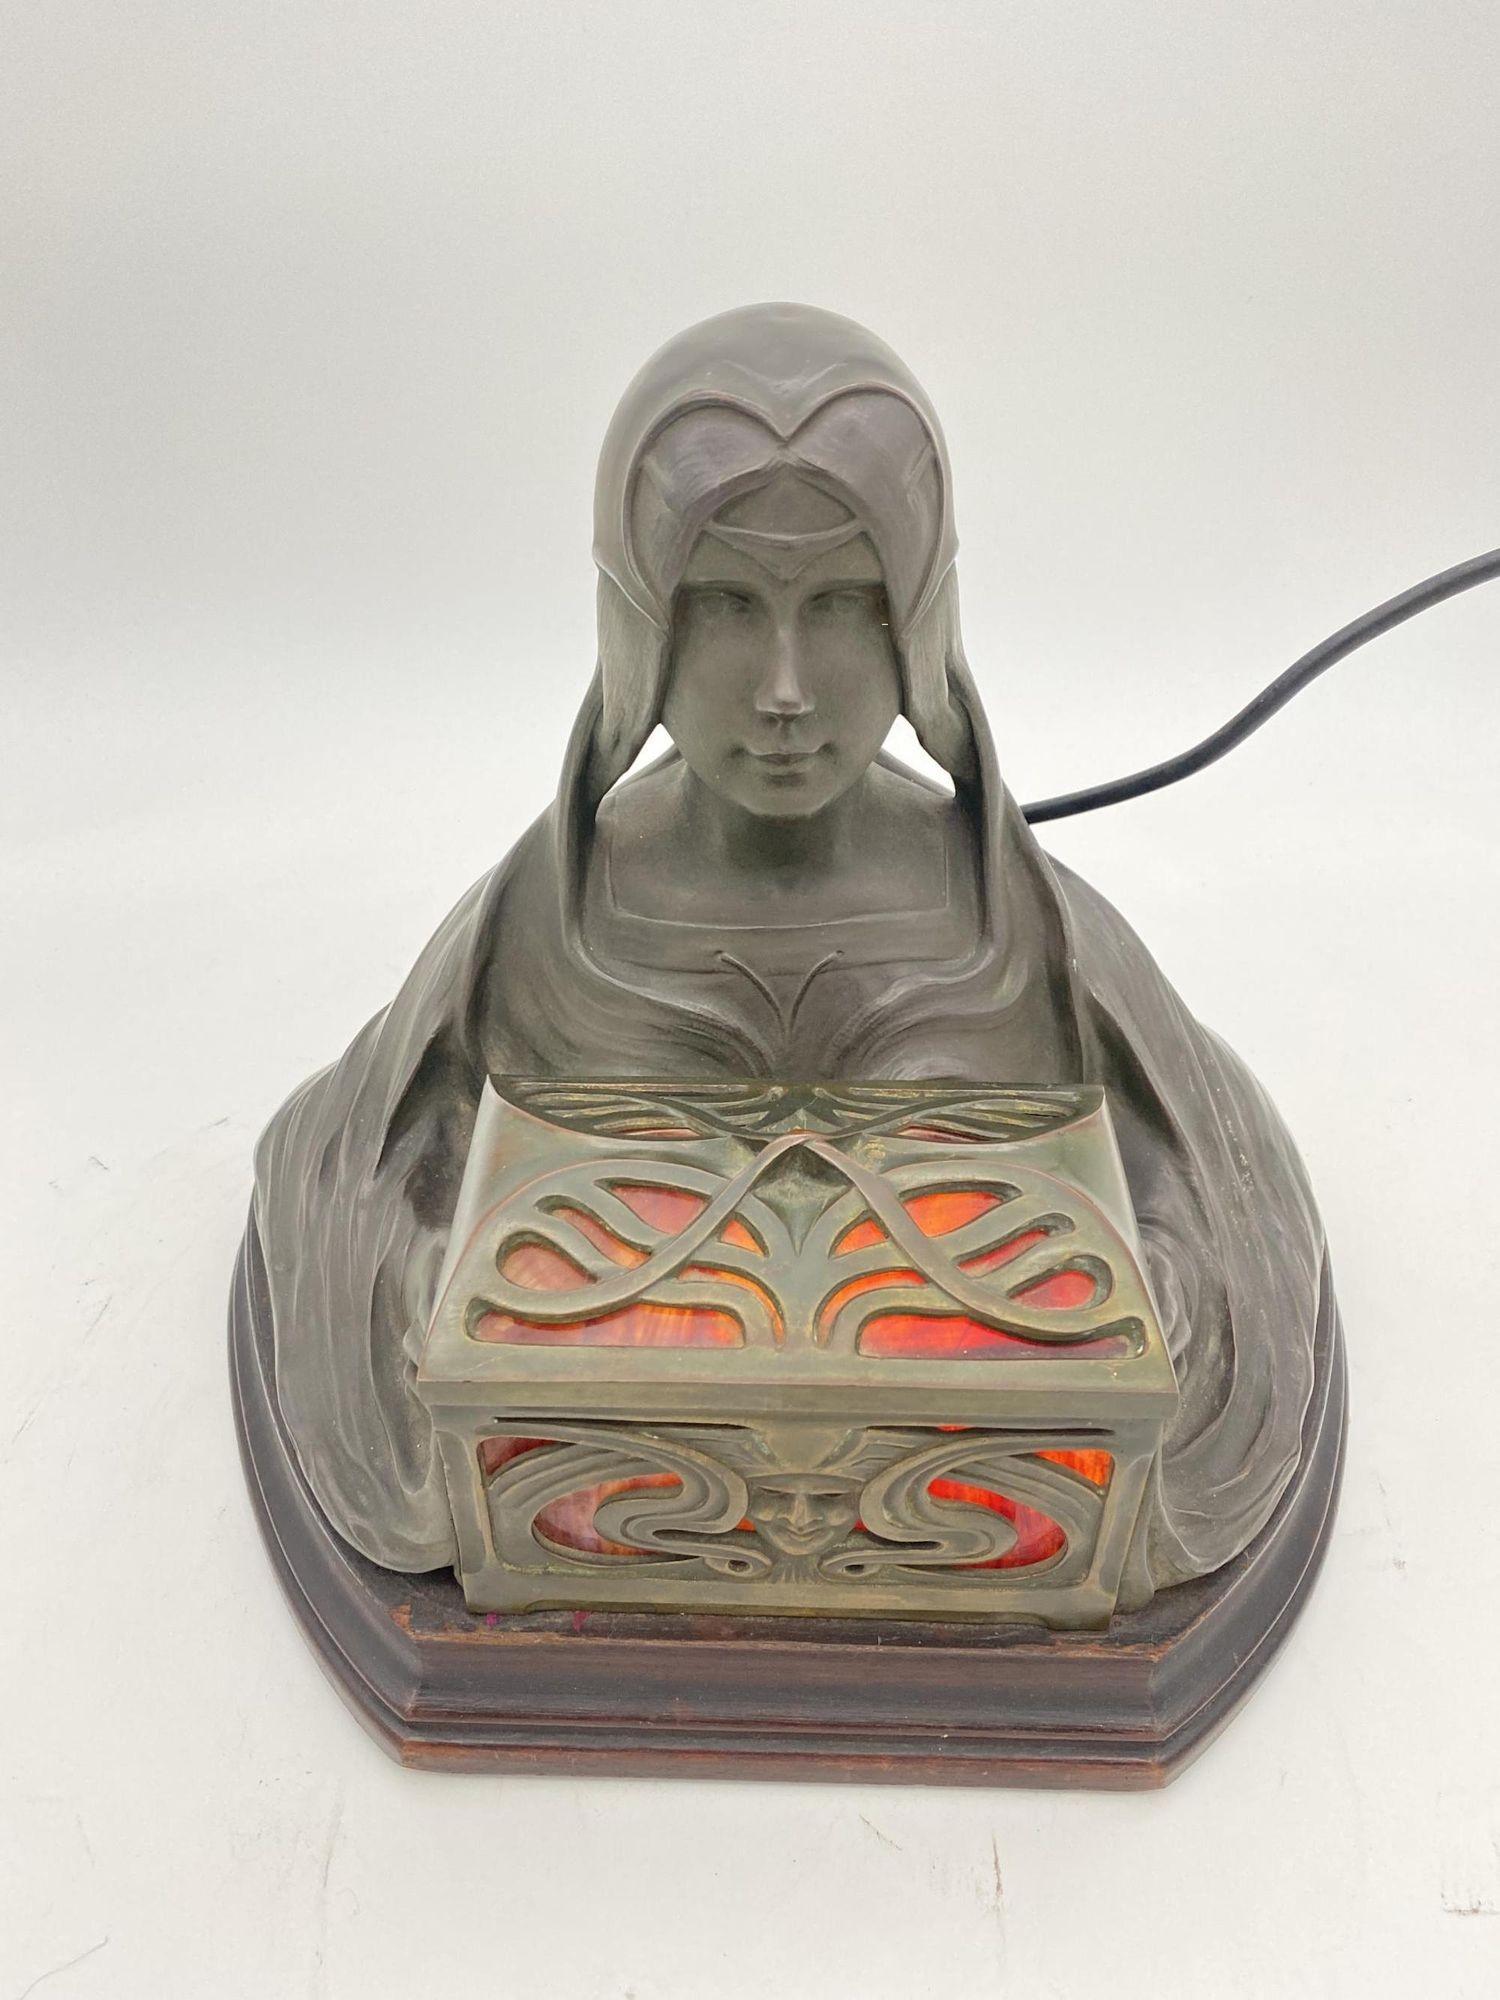 Art Nouveau sculpture by in gilded bronze representing a young girl holding an illuminating casket with panes of marbled red glass resting on a mahogany base.

Great example of Art Nouveau sculpting and casting at its finest , time has given the